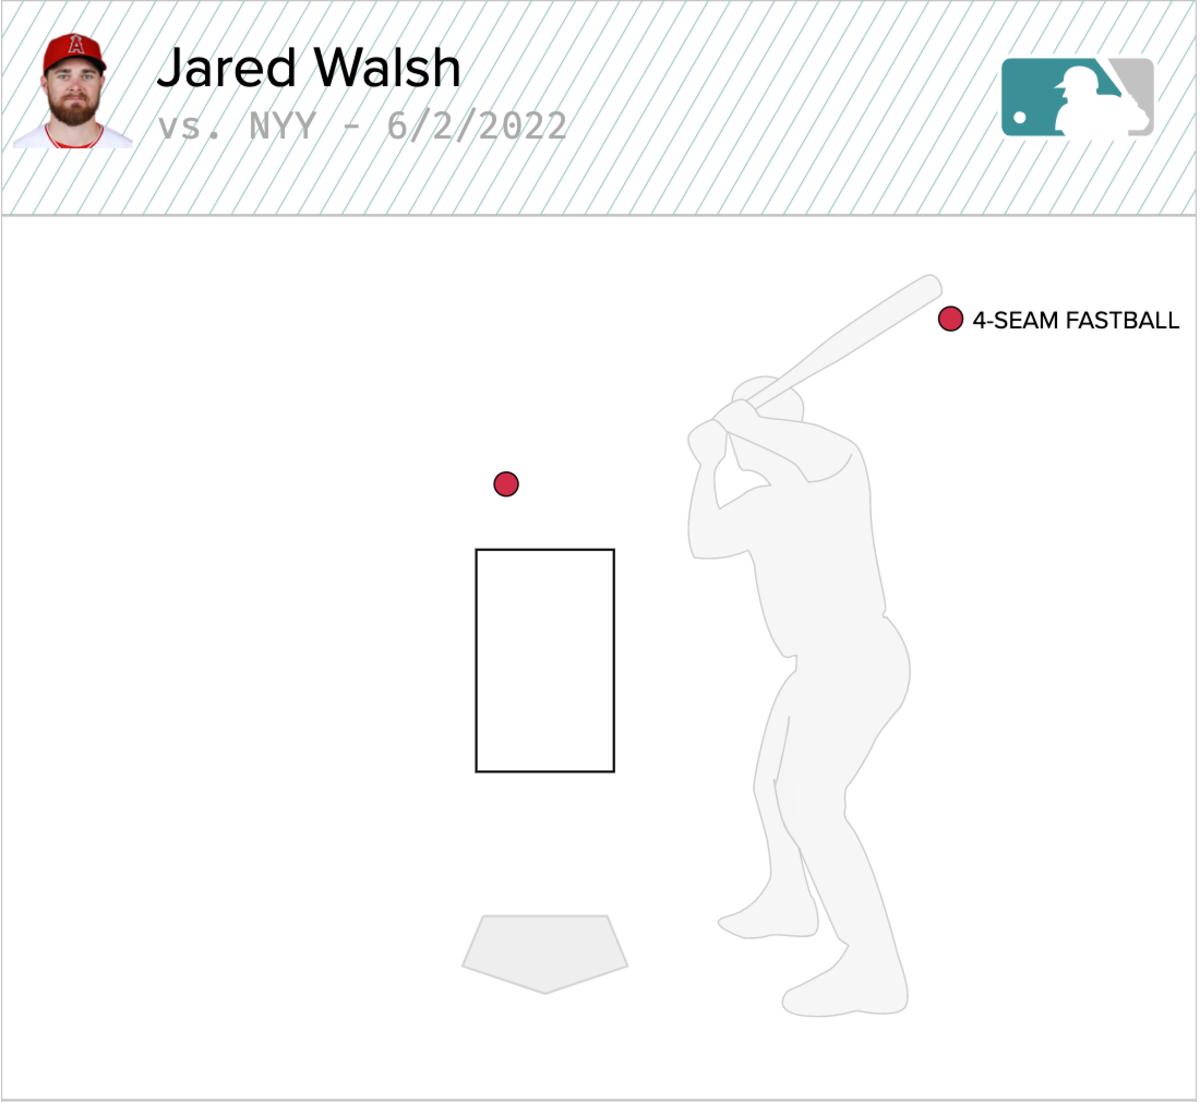 The chart of the pitch Jared Walsh hit to break up Jameson Taillion’s perfect game.